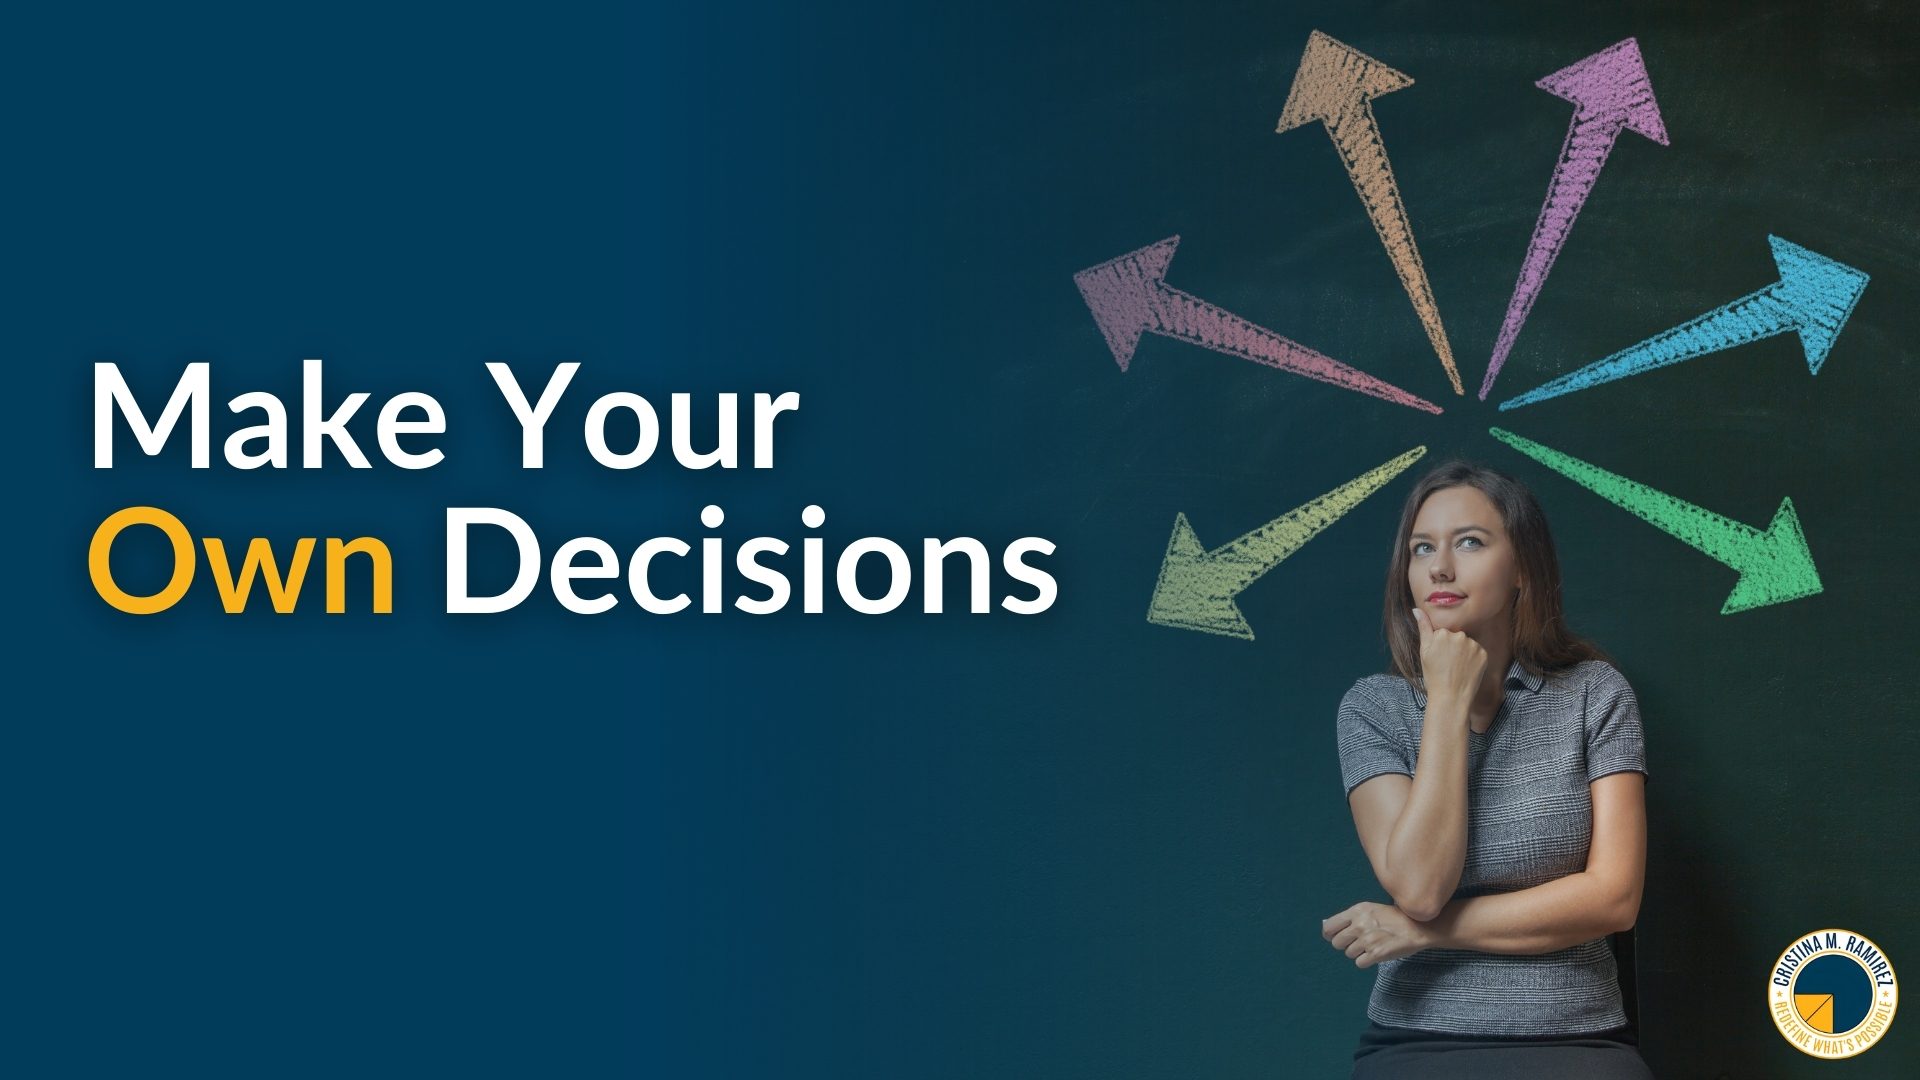 Make Your Own Decisions